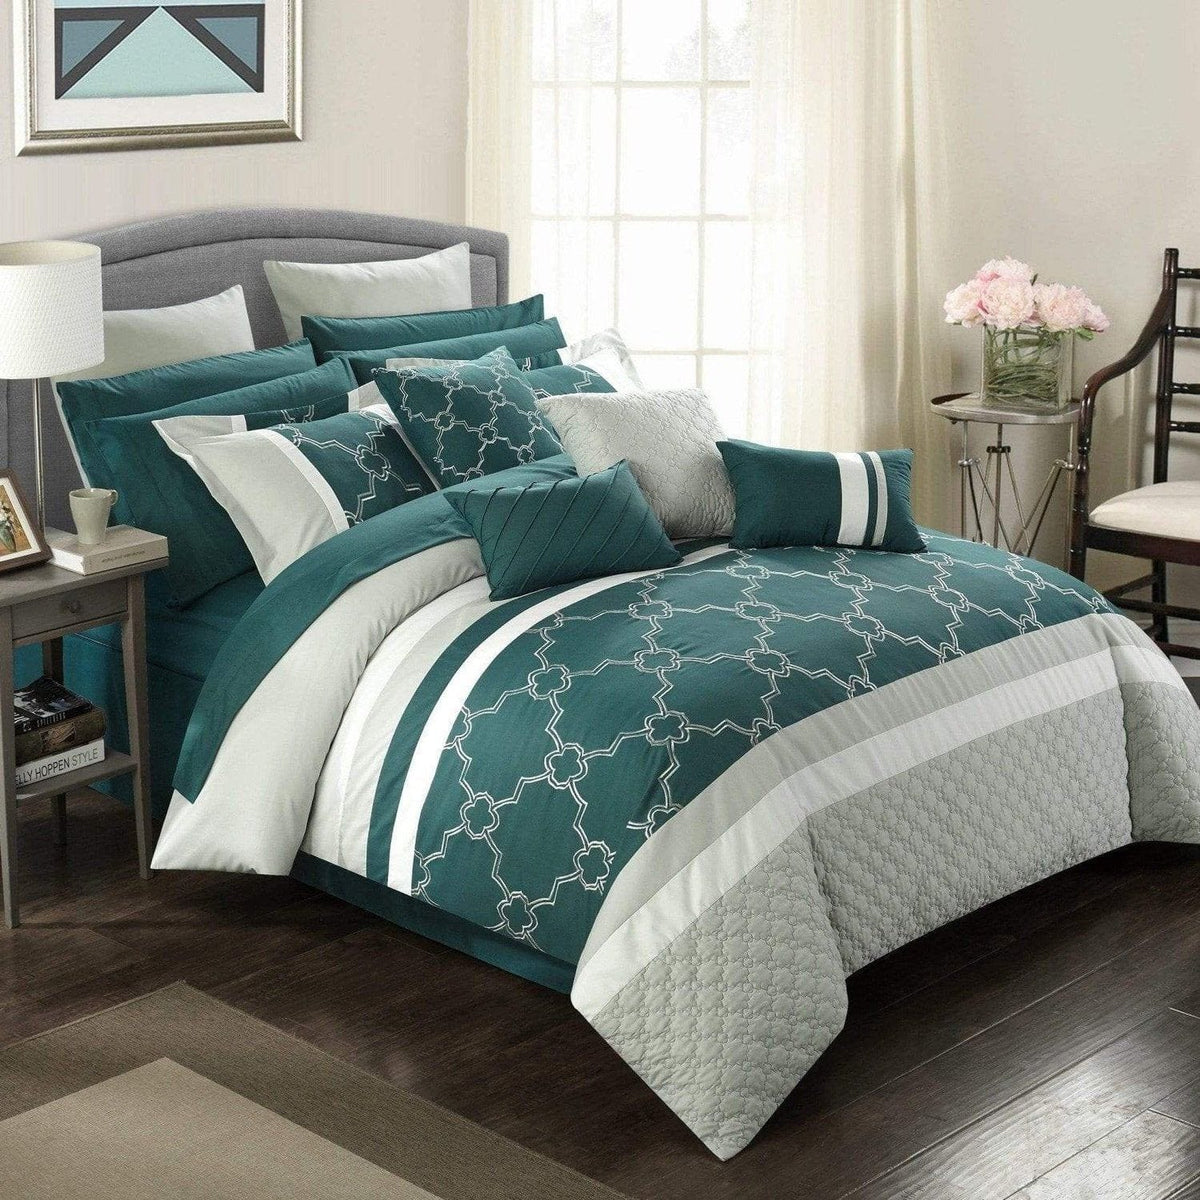 Chic Home Camilia 16 Piece Quilted Comforter Set 